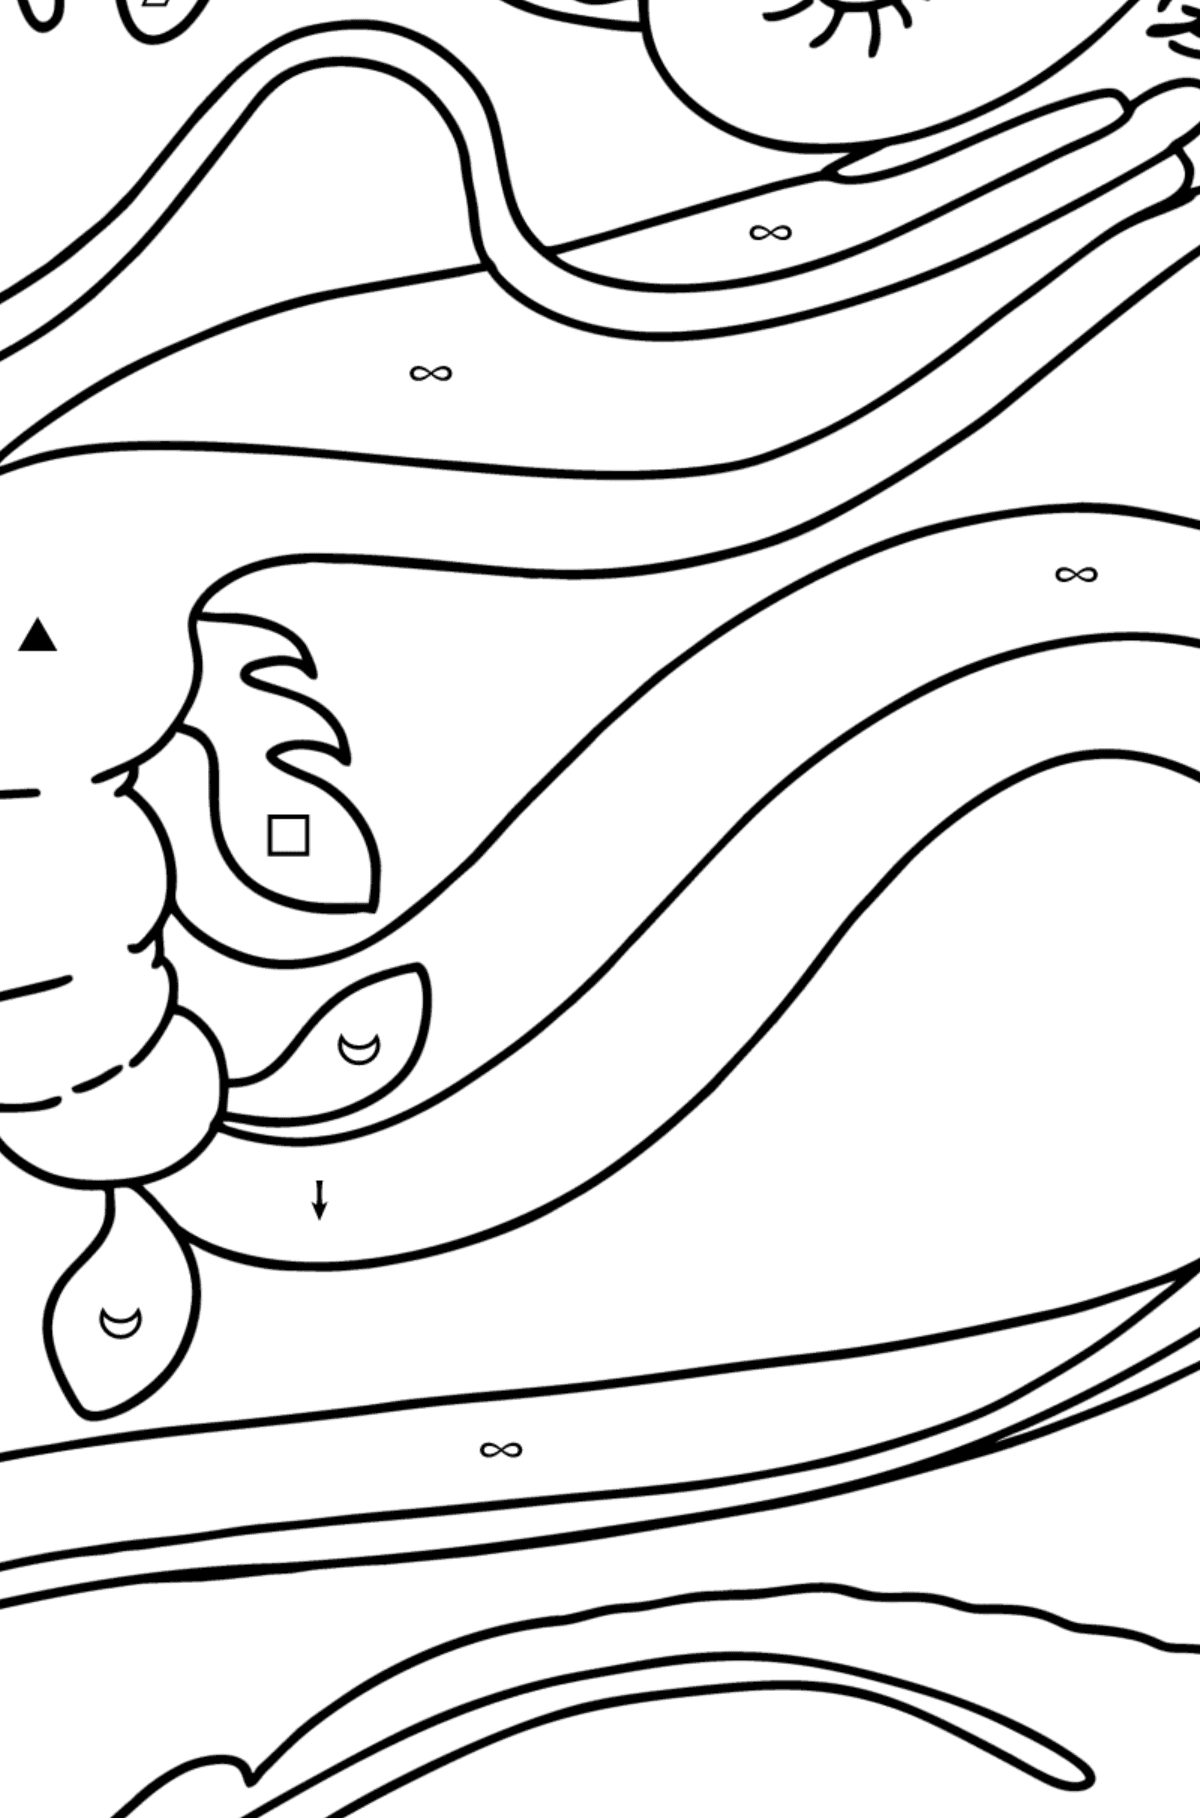 Snake Dragon coloring page - Coloring by Symbols and Geometric Shapes for Kids